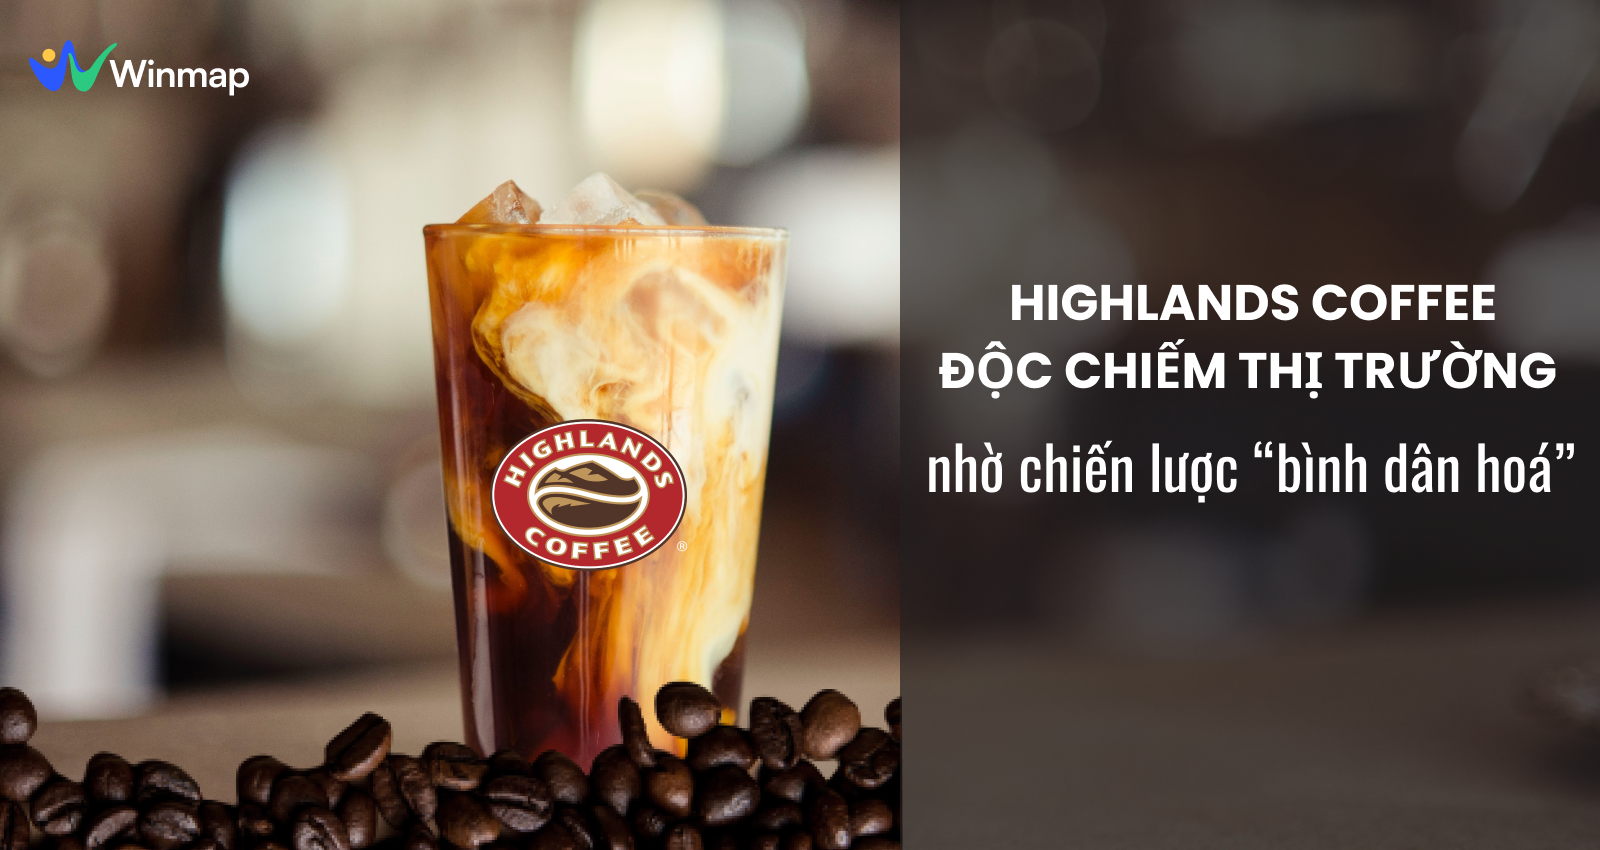 chien-luoc-marketing-nao-giup-highlands-coffee-doc-chiem-thi-truong